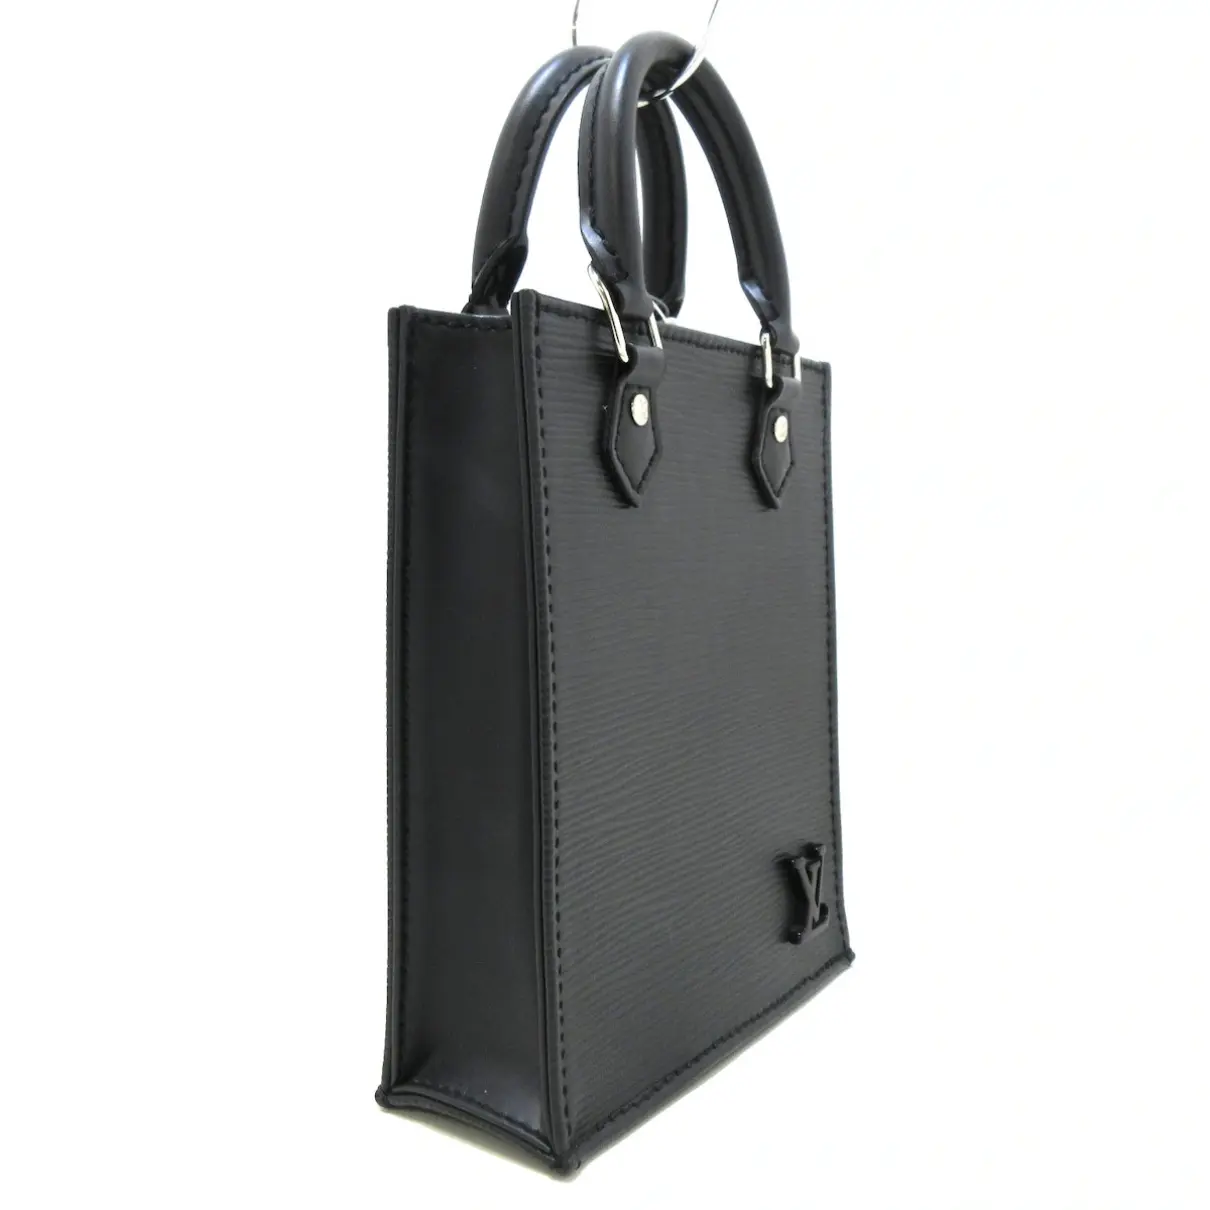 Buy Louis Vuitton Leather tote online